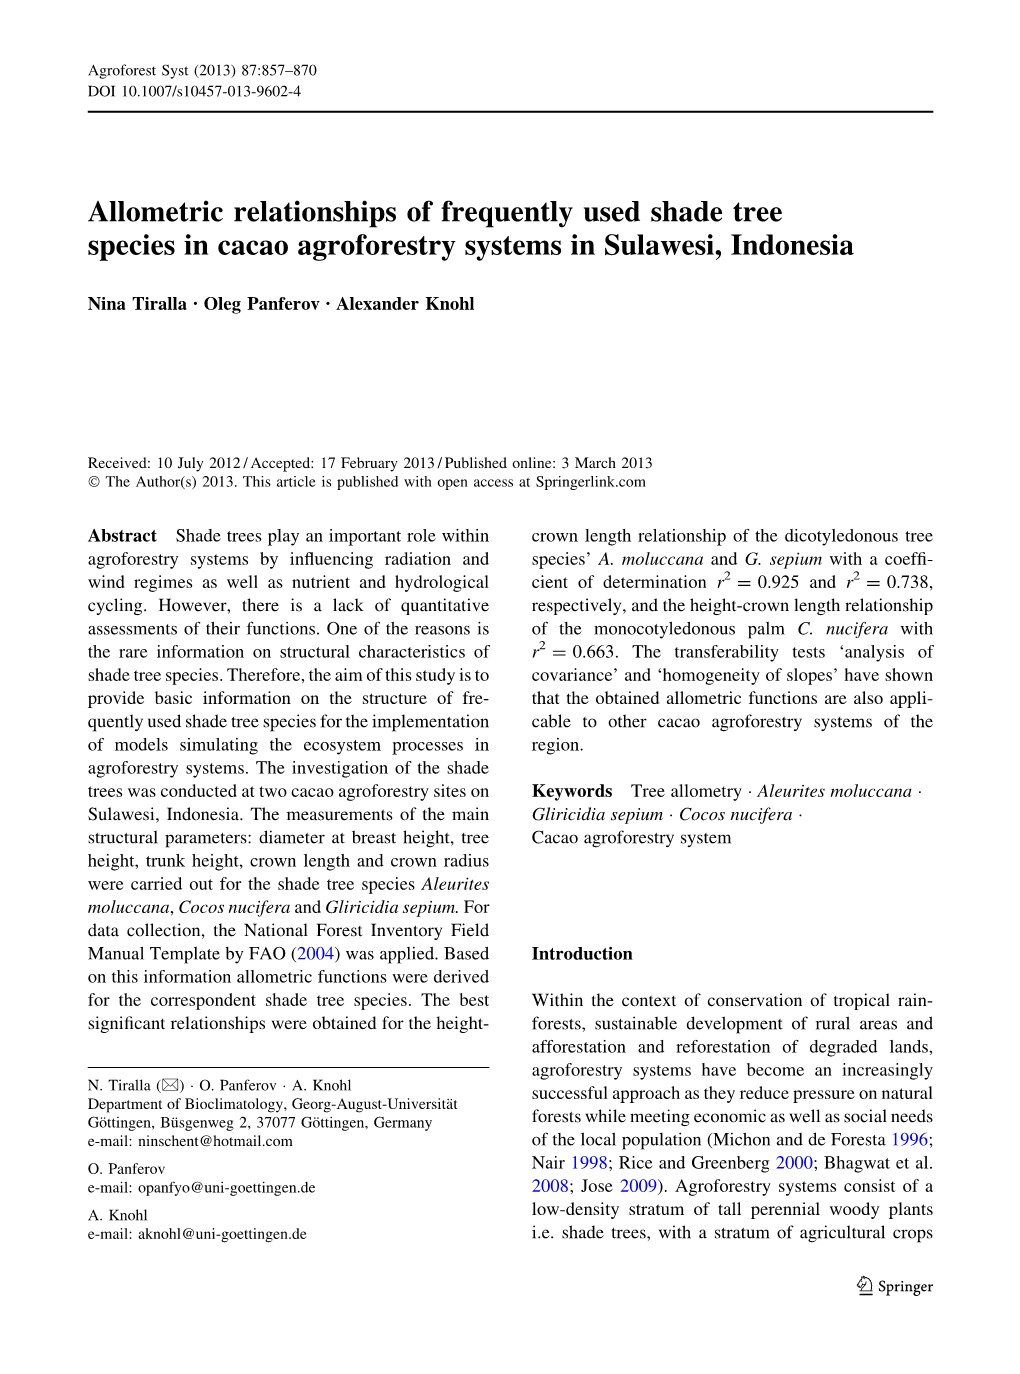 Allometric Relationships of Frequently Used Shade Tree Species in Cacao Agroforestry Systems in Sulawesi, Indonesia